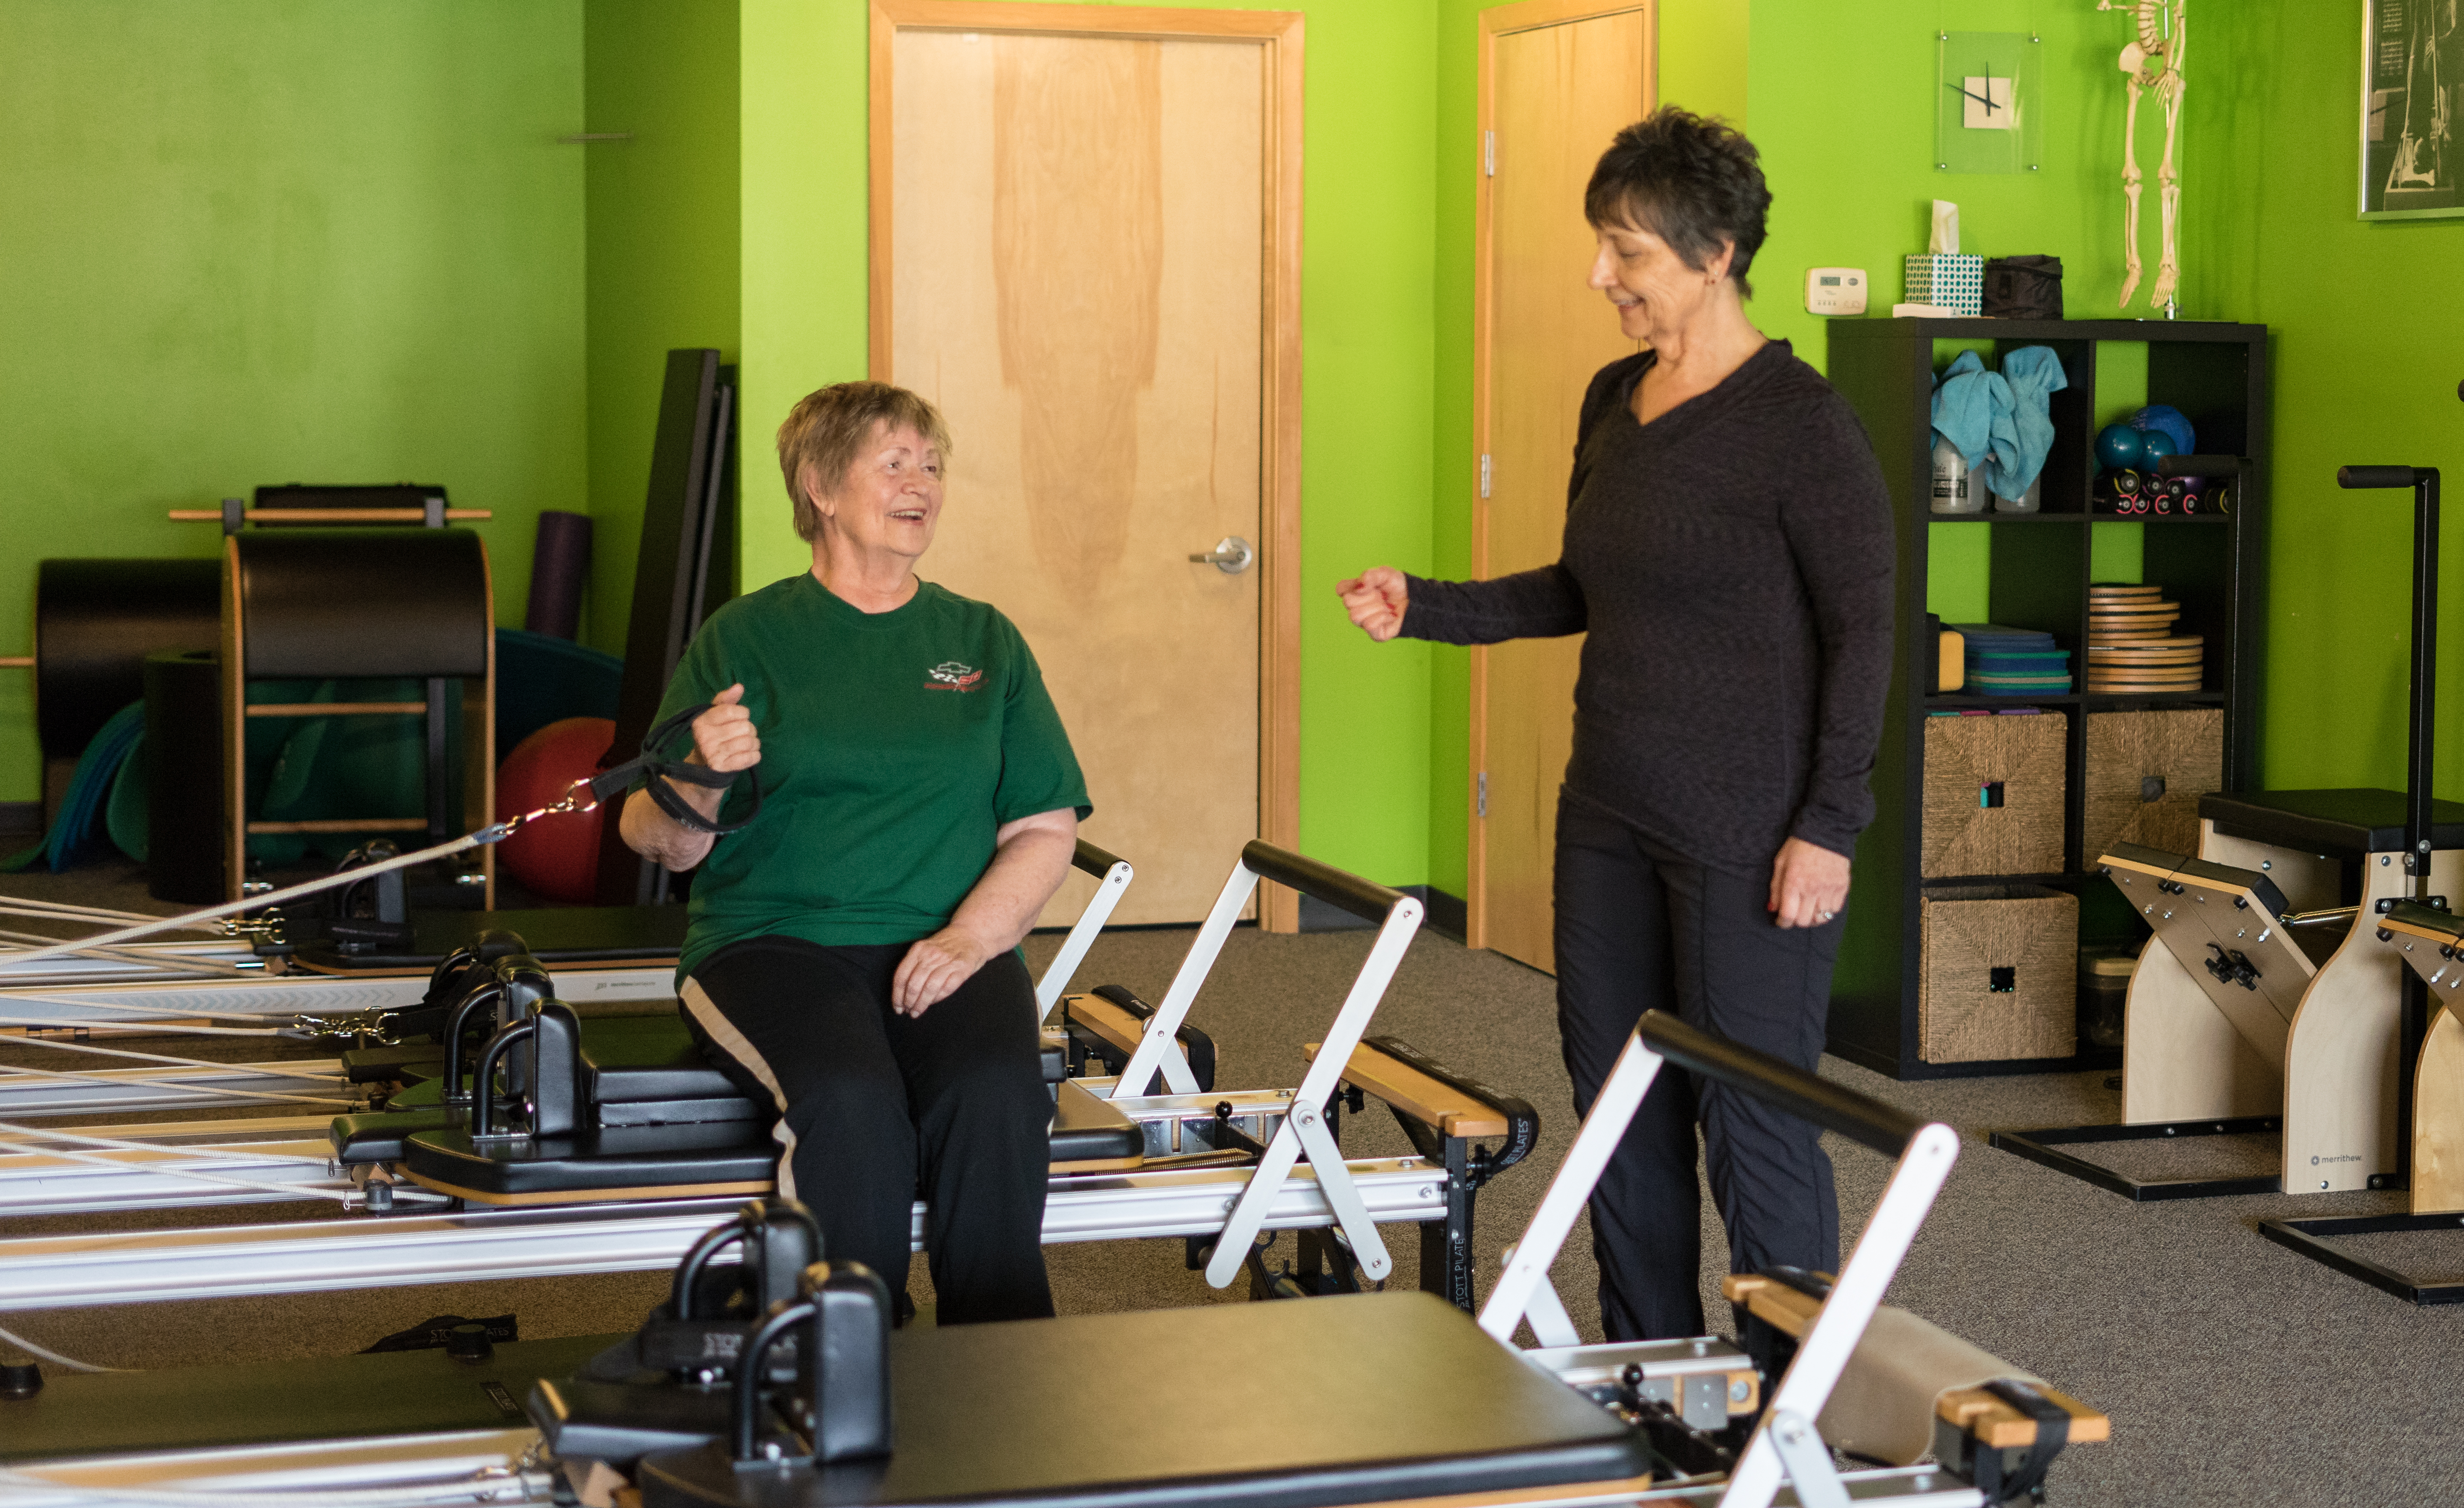 Exercise of the Month  STOTT PILATES® Rehab: Crossover Press on